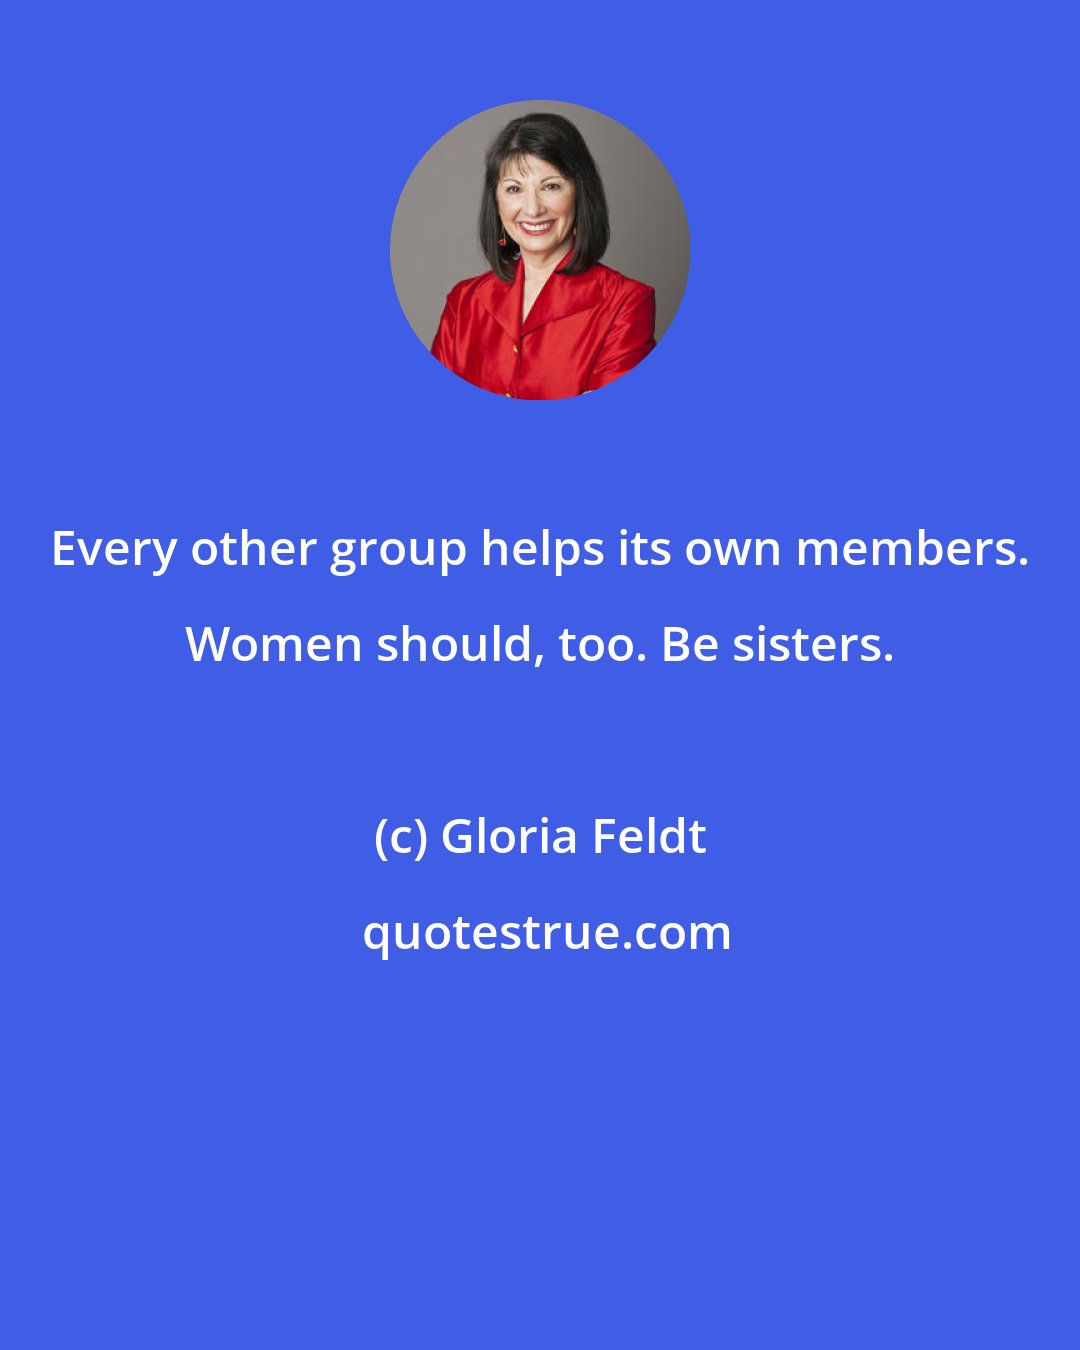 Gloria Feldt: Every other group helps its own members. Women should, too. Be sisters.